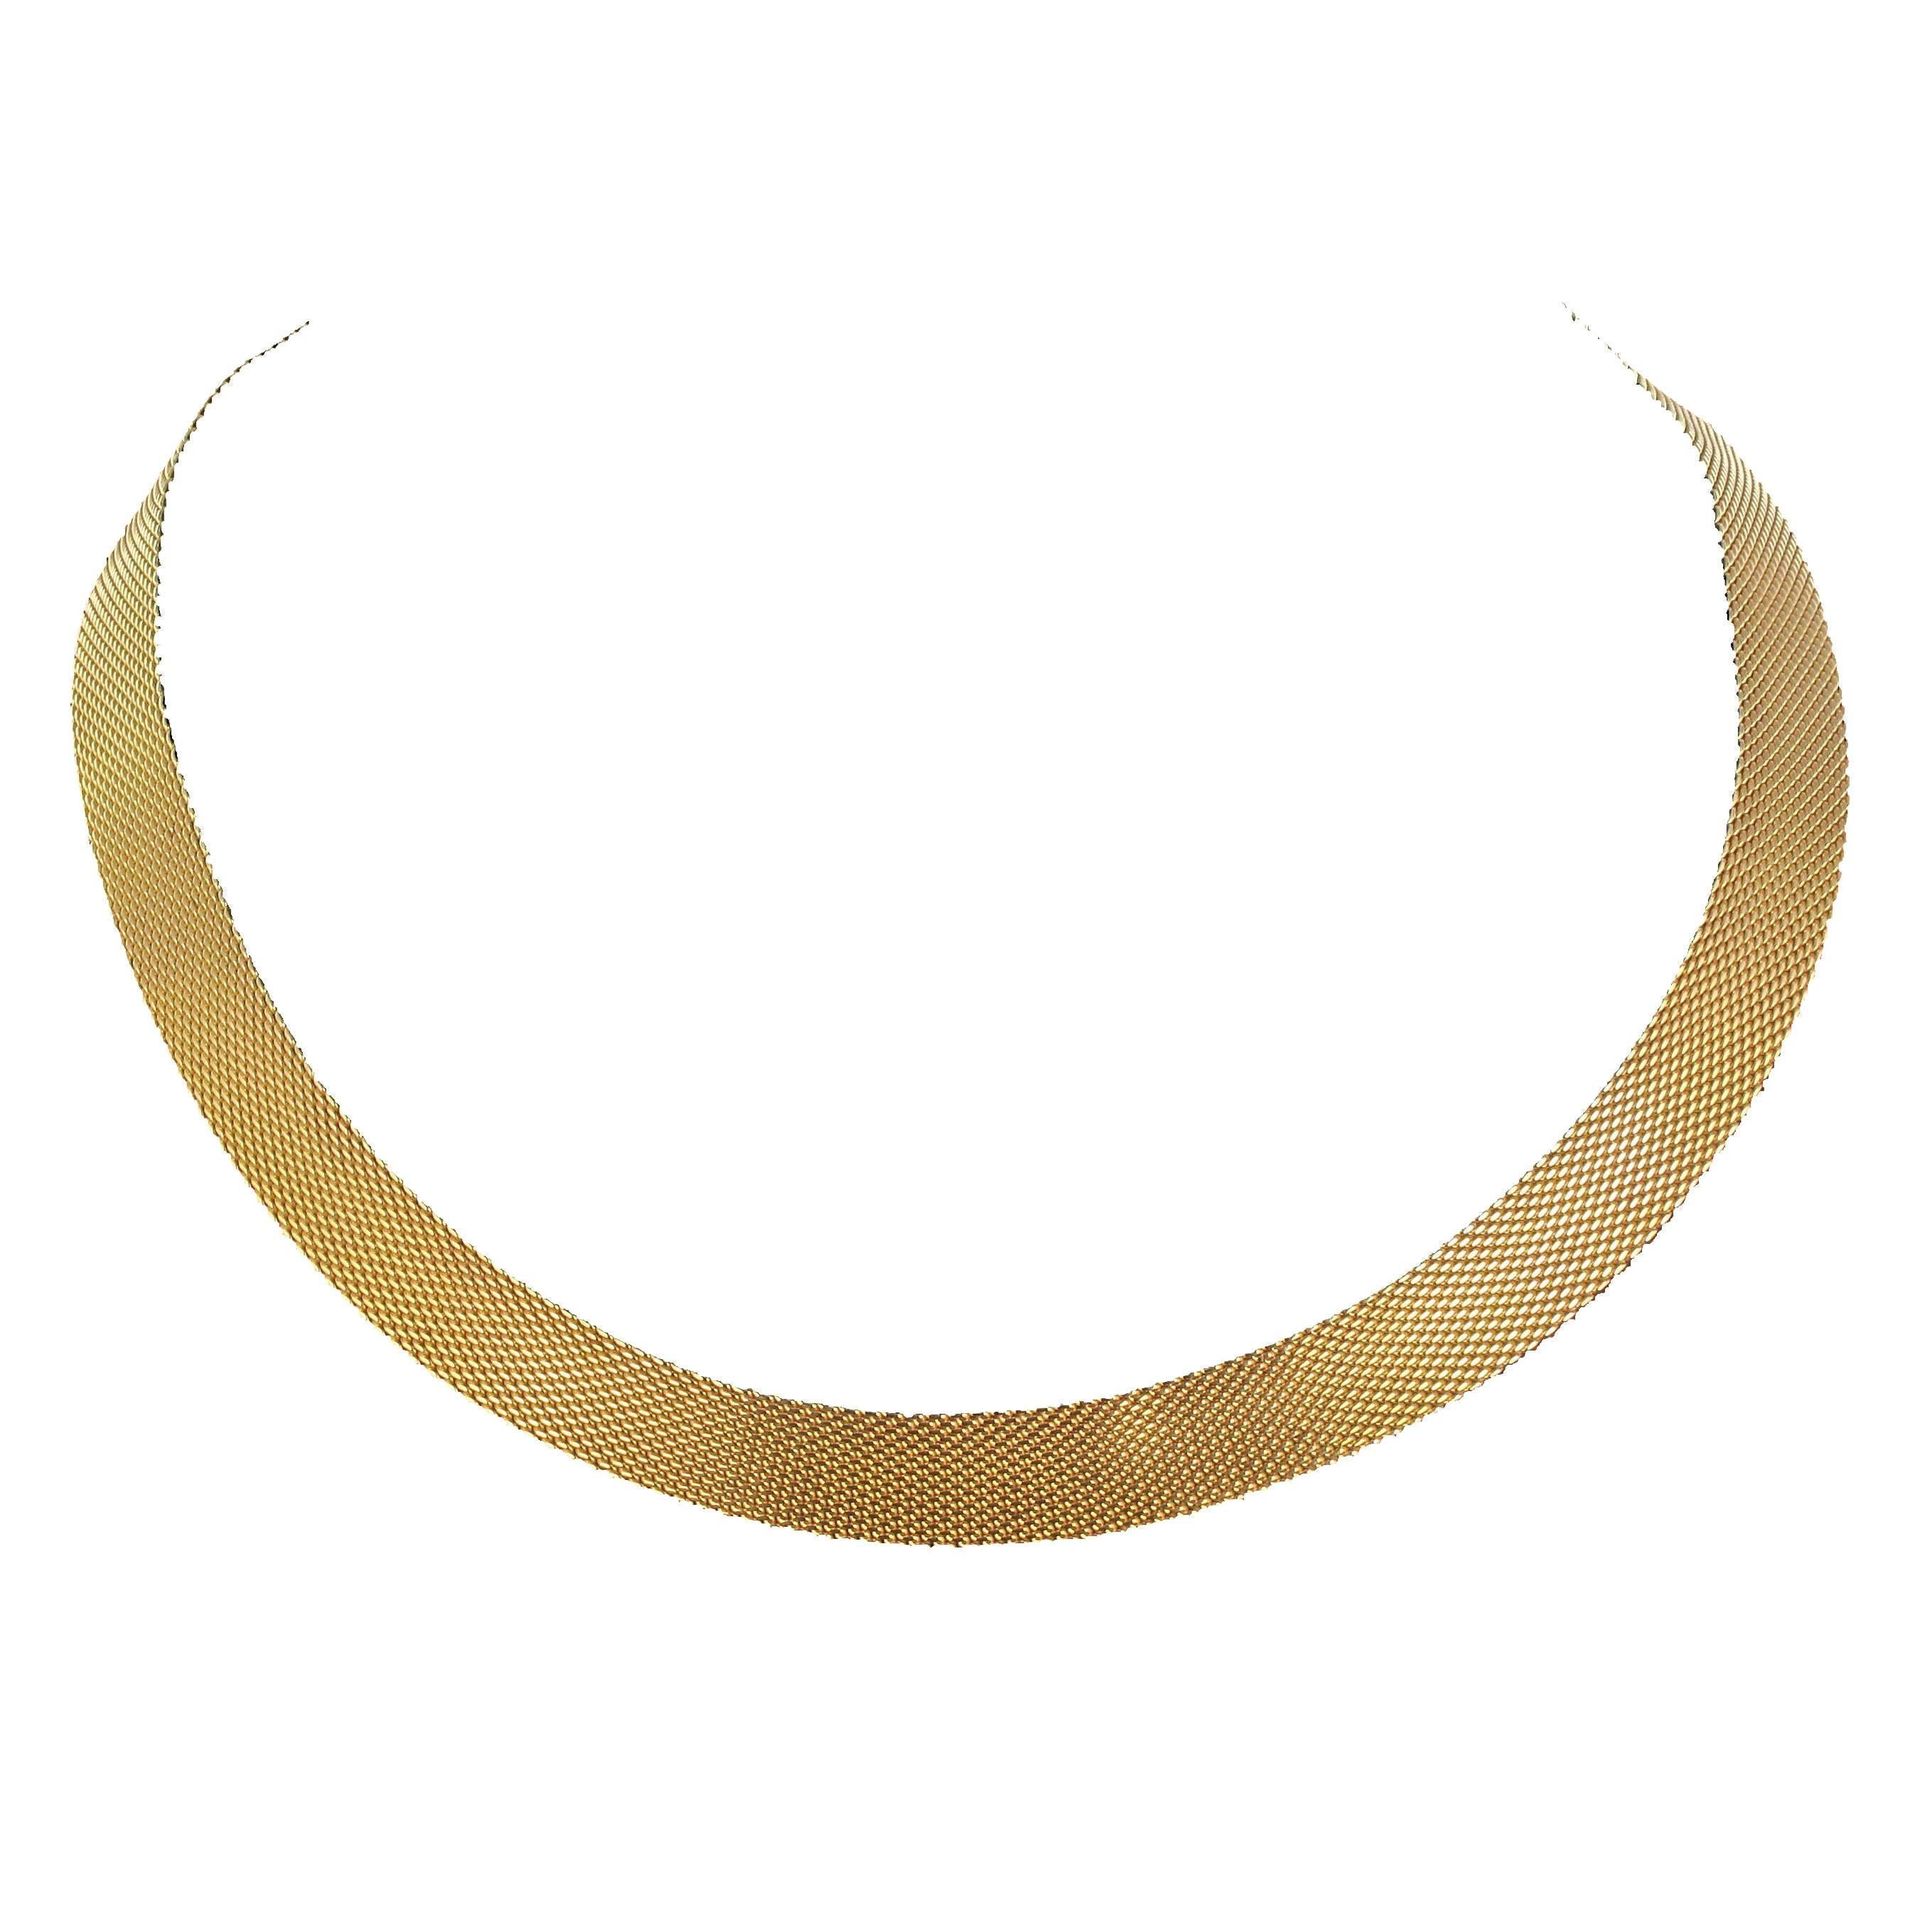 1960s Flat Yellow Gold Necklace